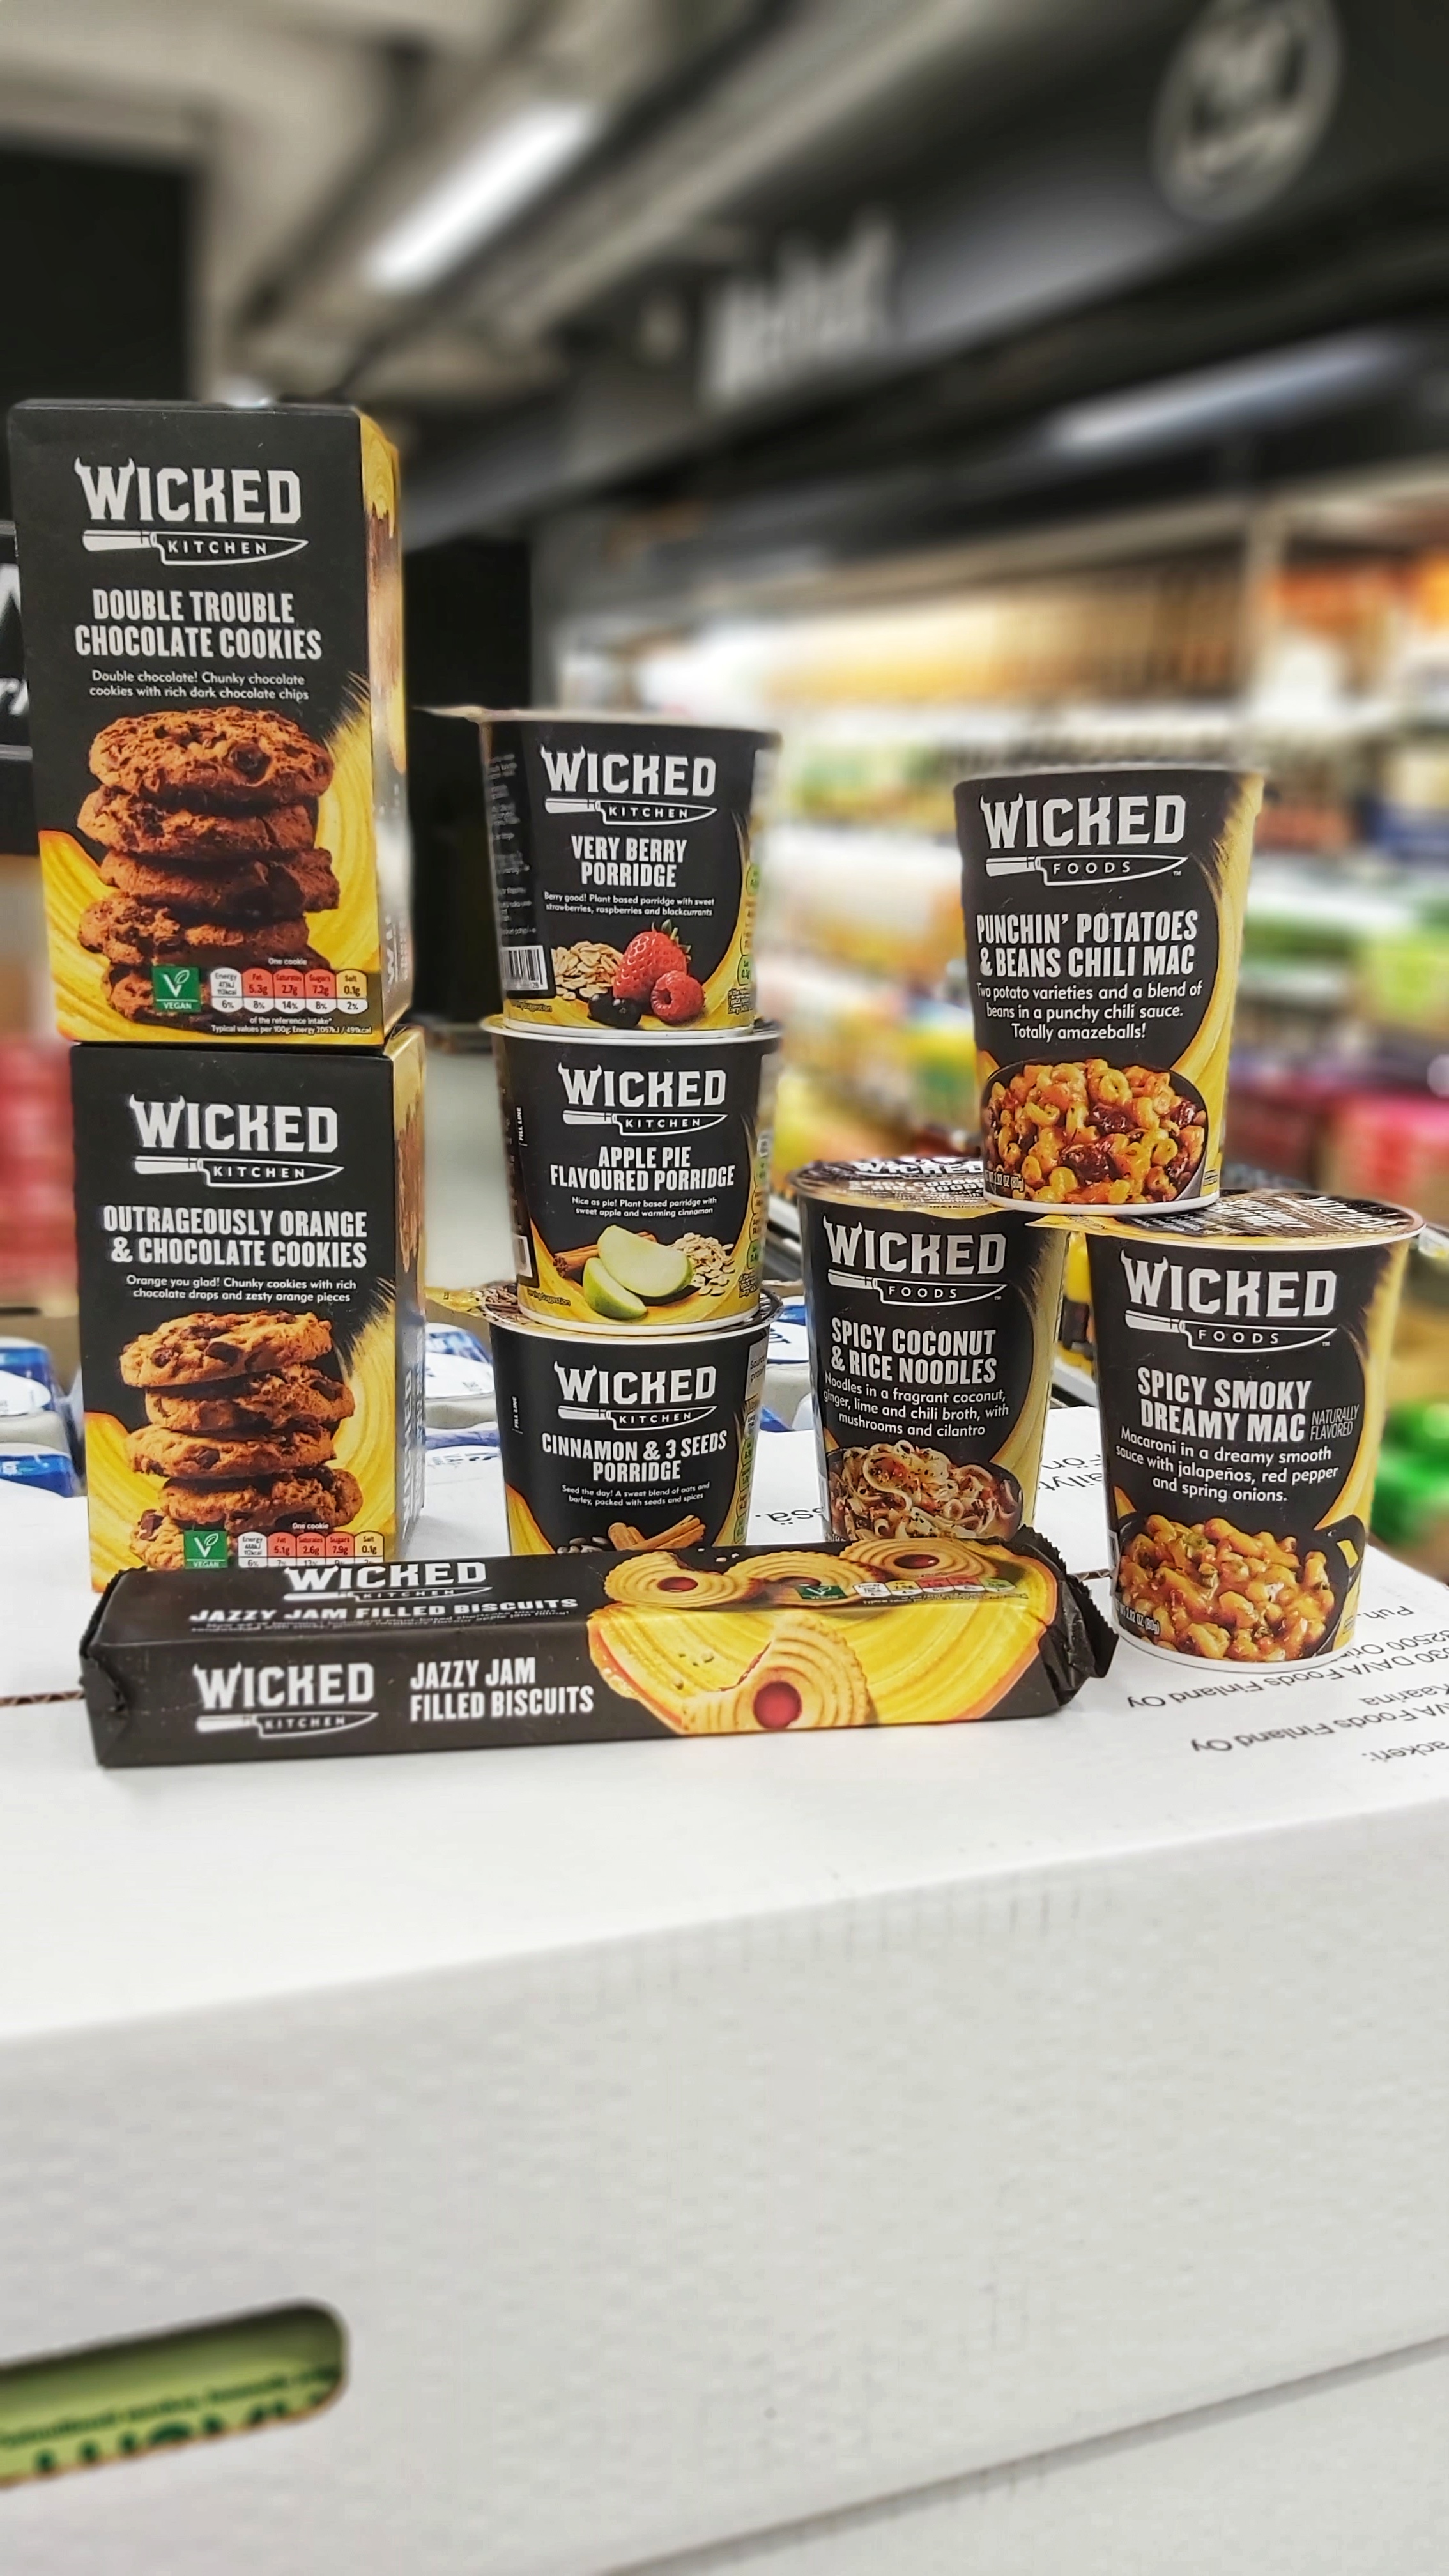 The variety of Wicked Kitchen products makes it easy to go plant-based.